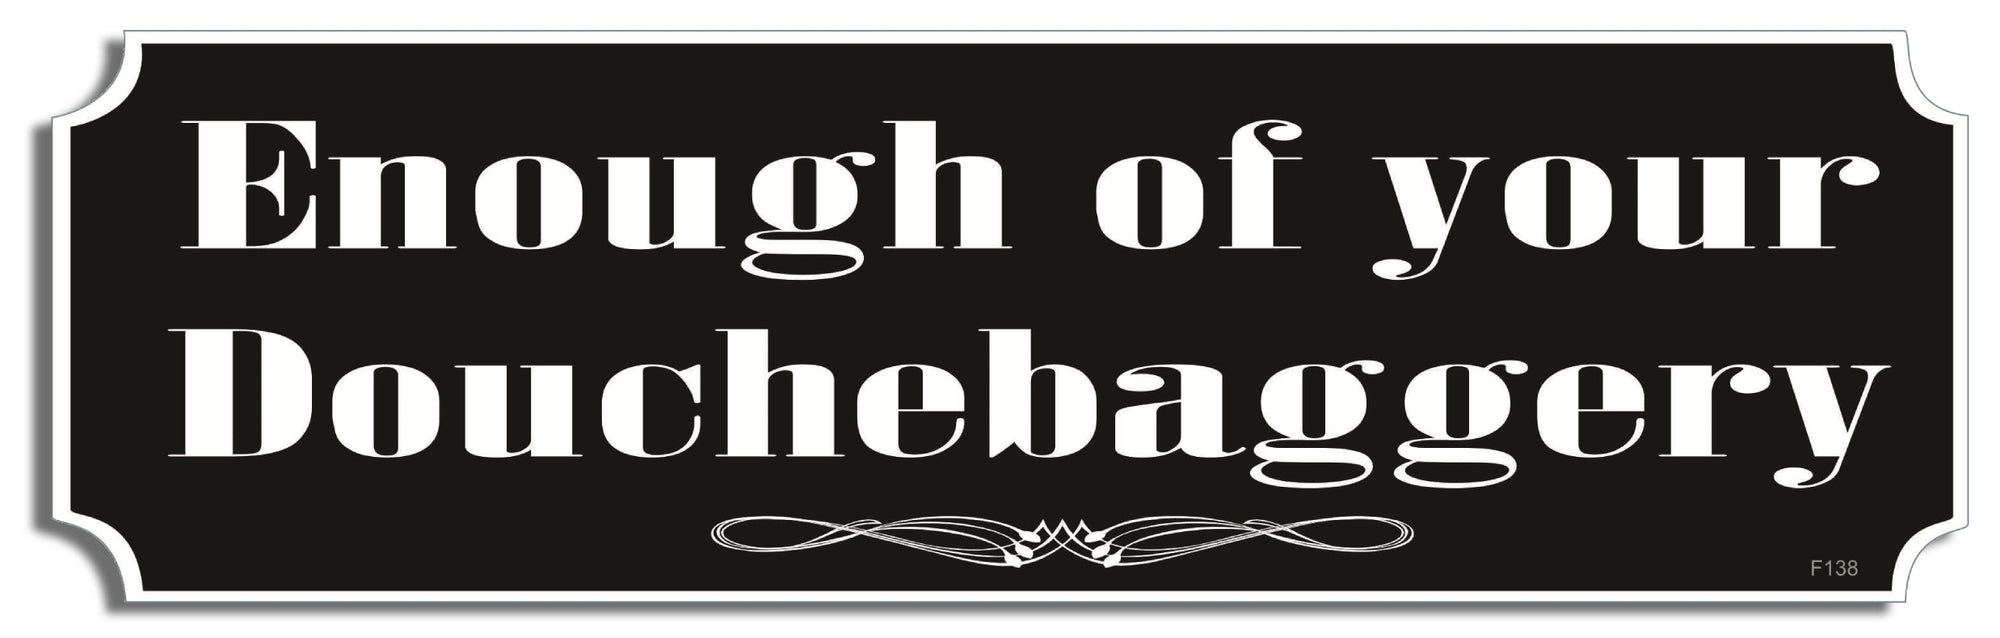 Enough of your douchebaggery - 3" x 10" Bumper Sticker--Car Magnet- -  Decal Bumper Sticker-funny Bumper Sticker Car Magnet Enough of your douchebaggery-  Decal for cars funny, funny quote, funny saying